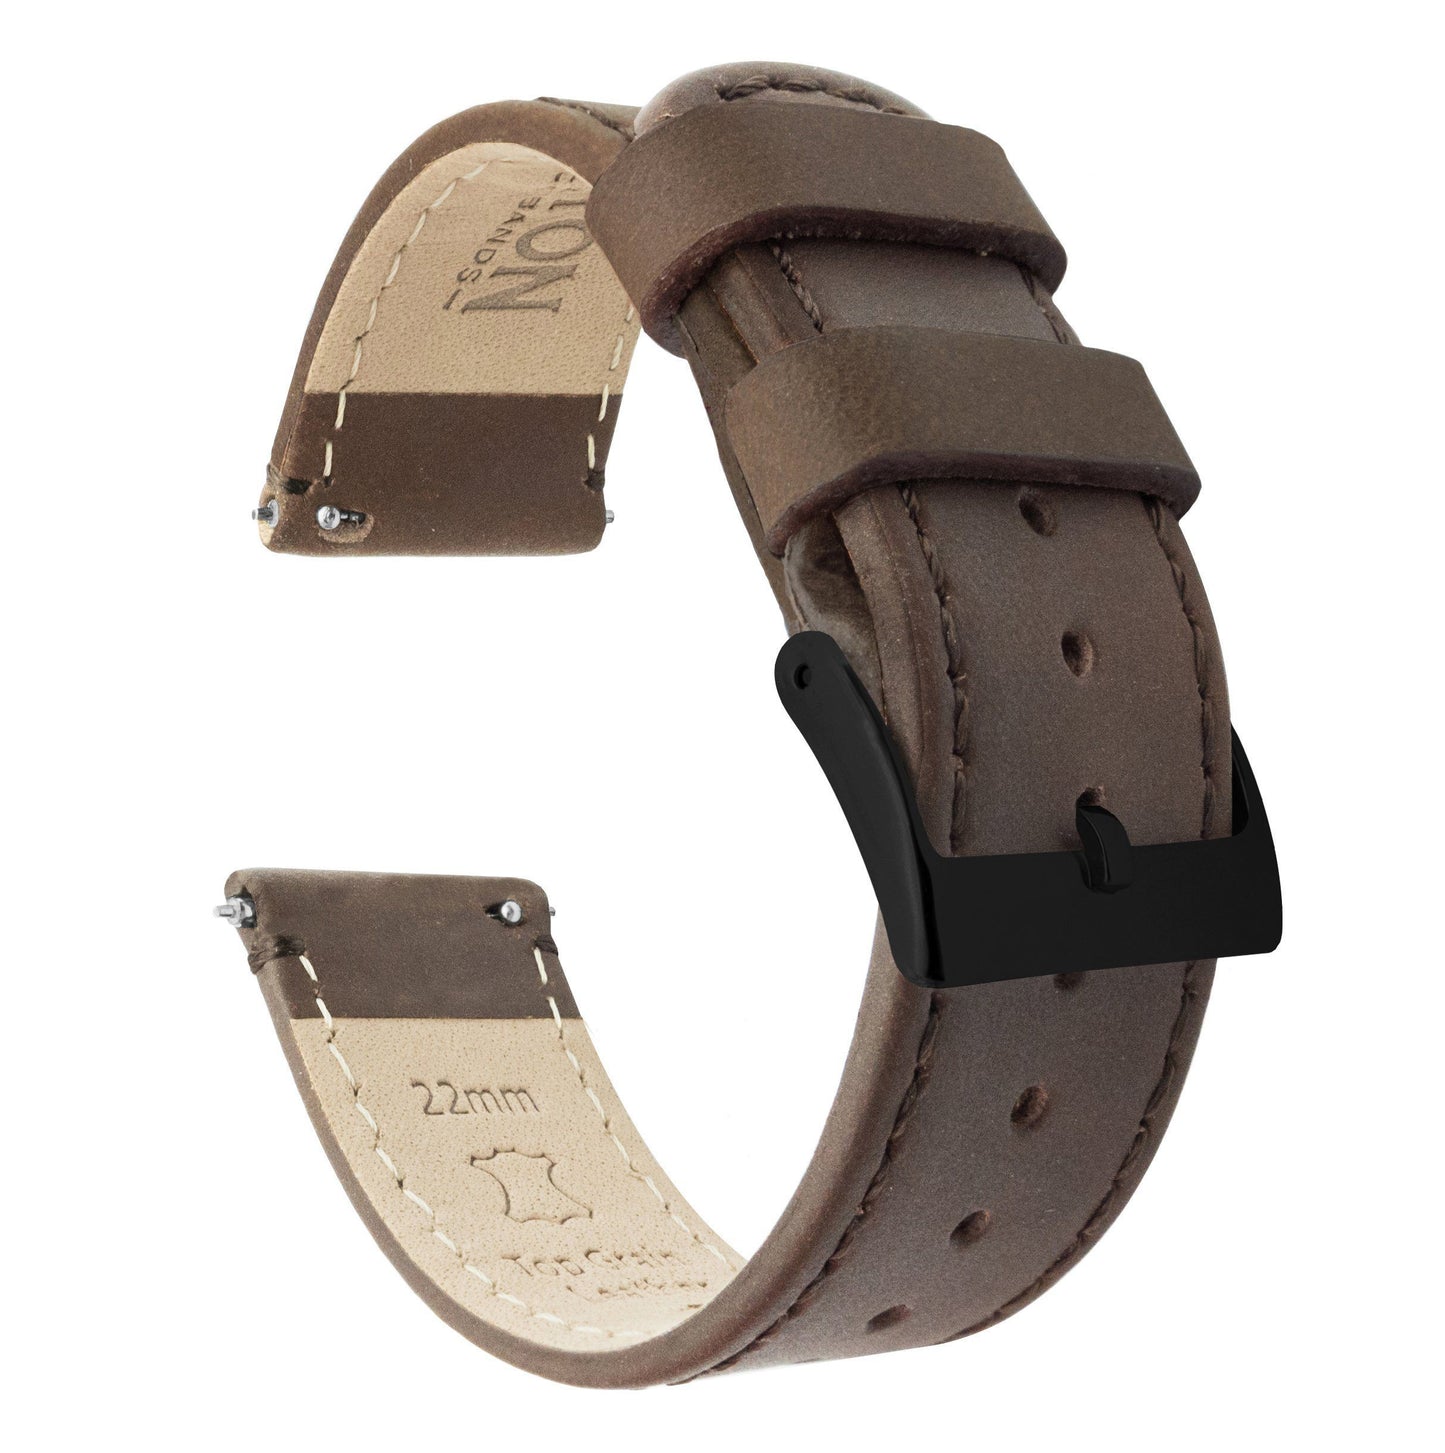 Samsung Galaxy Watch Active | Saddle Brown Leather & Stitching - Barton Watch Bands